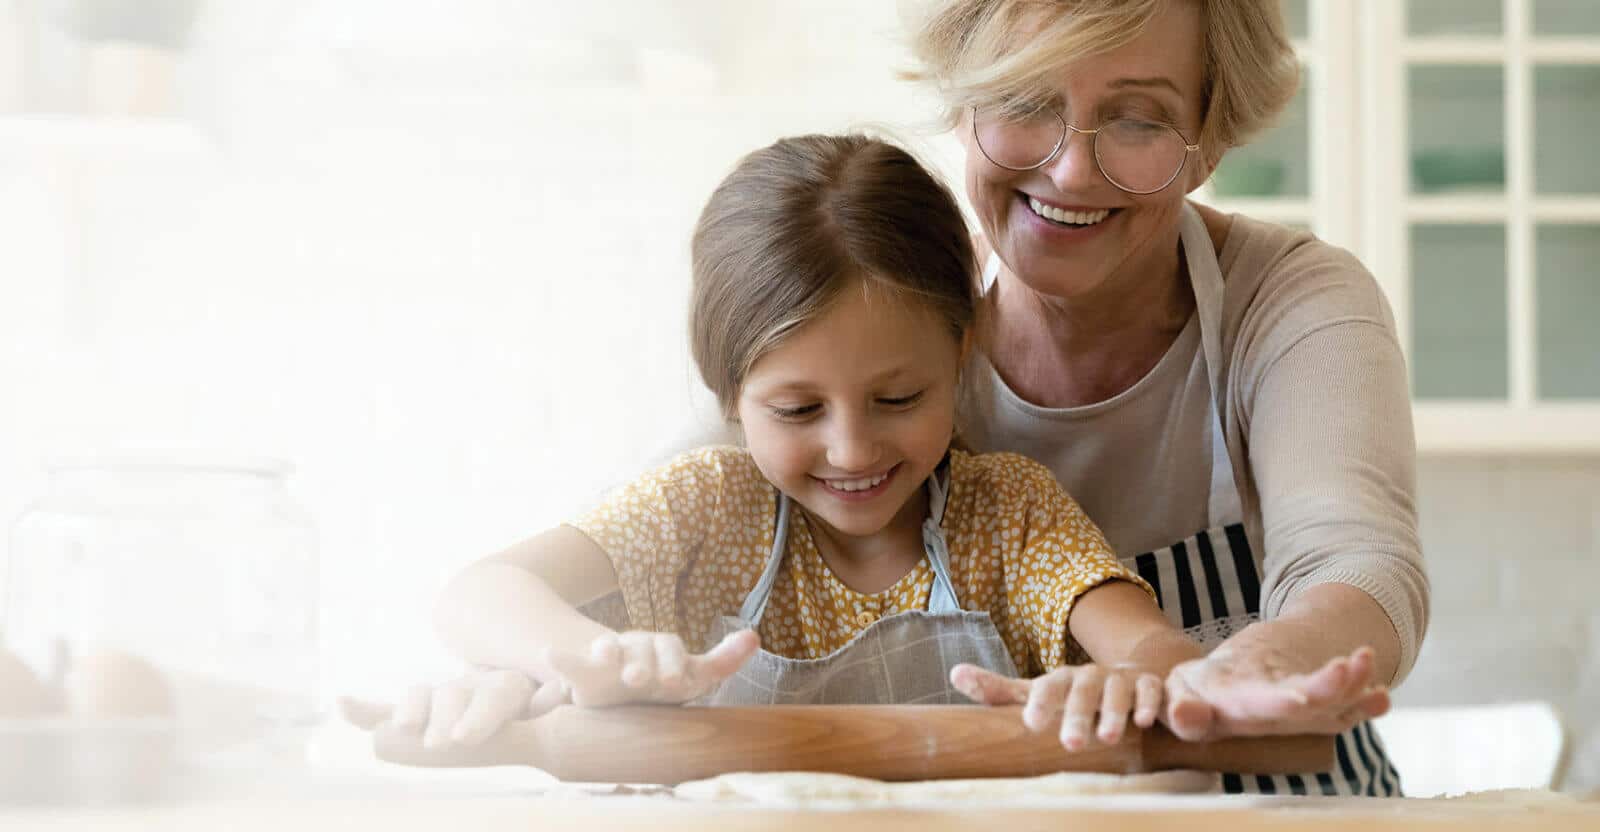 Older woman and young girl baking